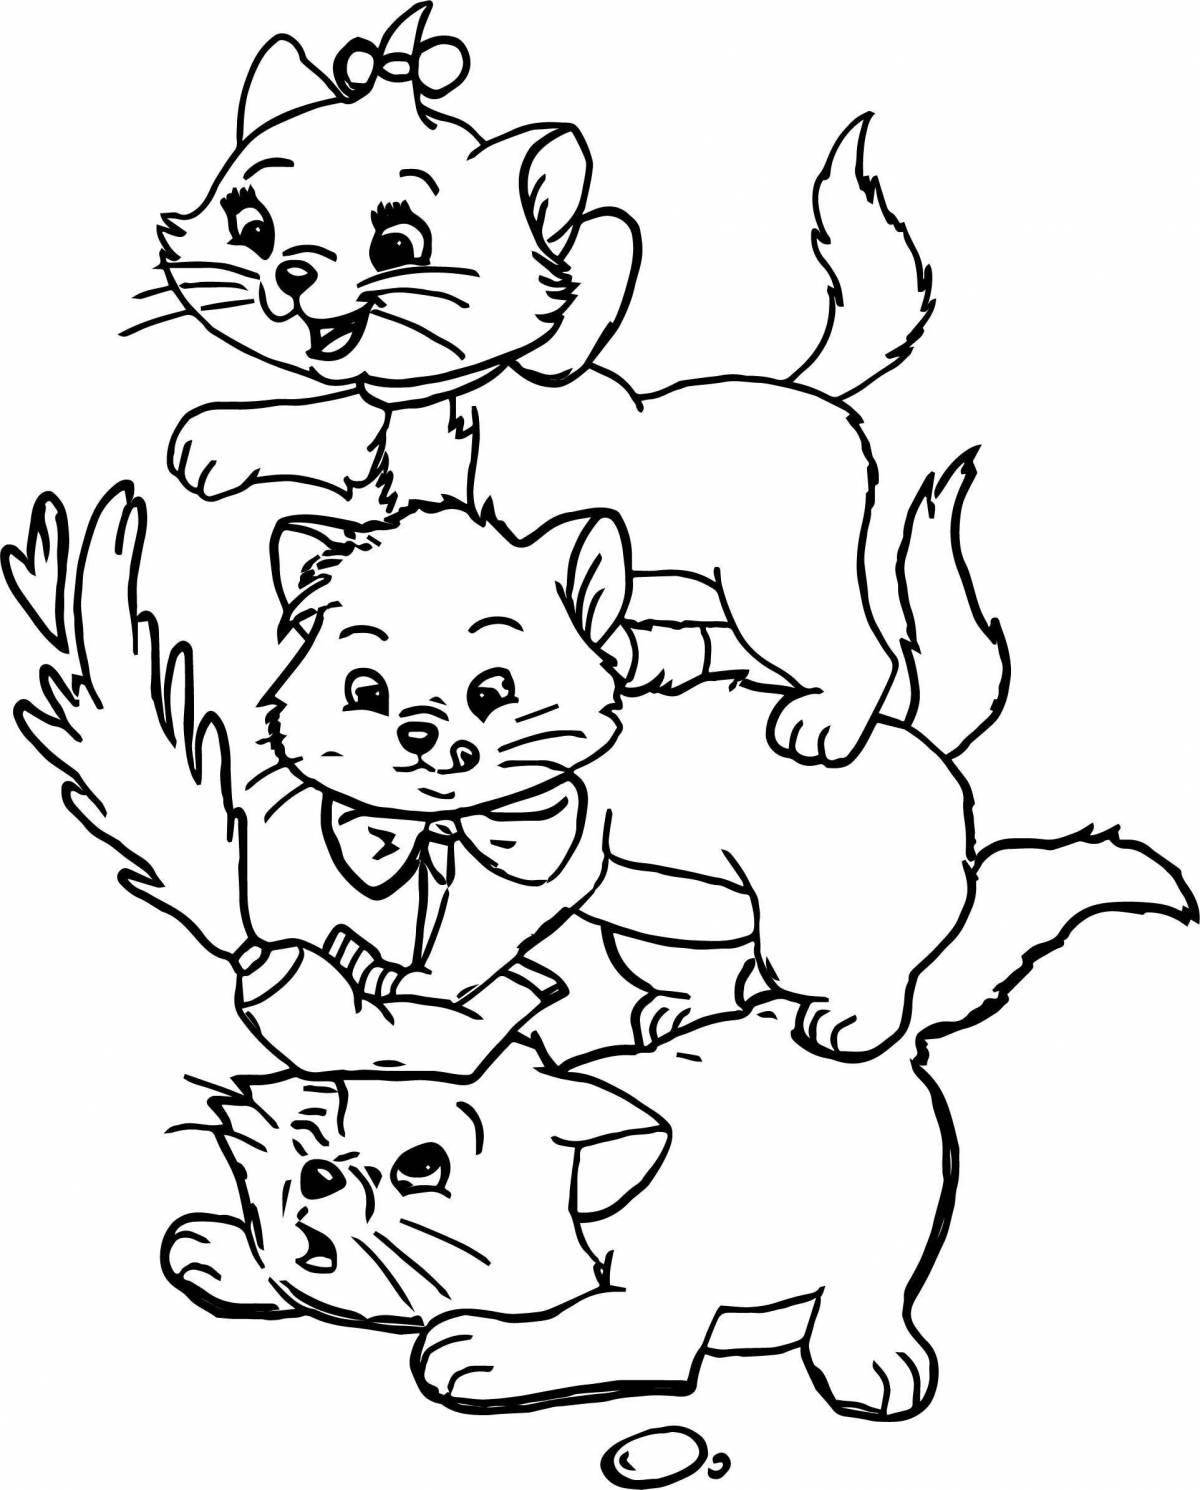 Amazing dog and cat coloring pages for kids